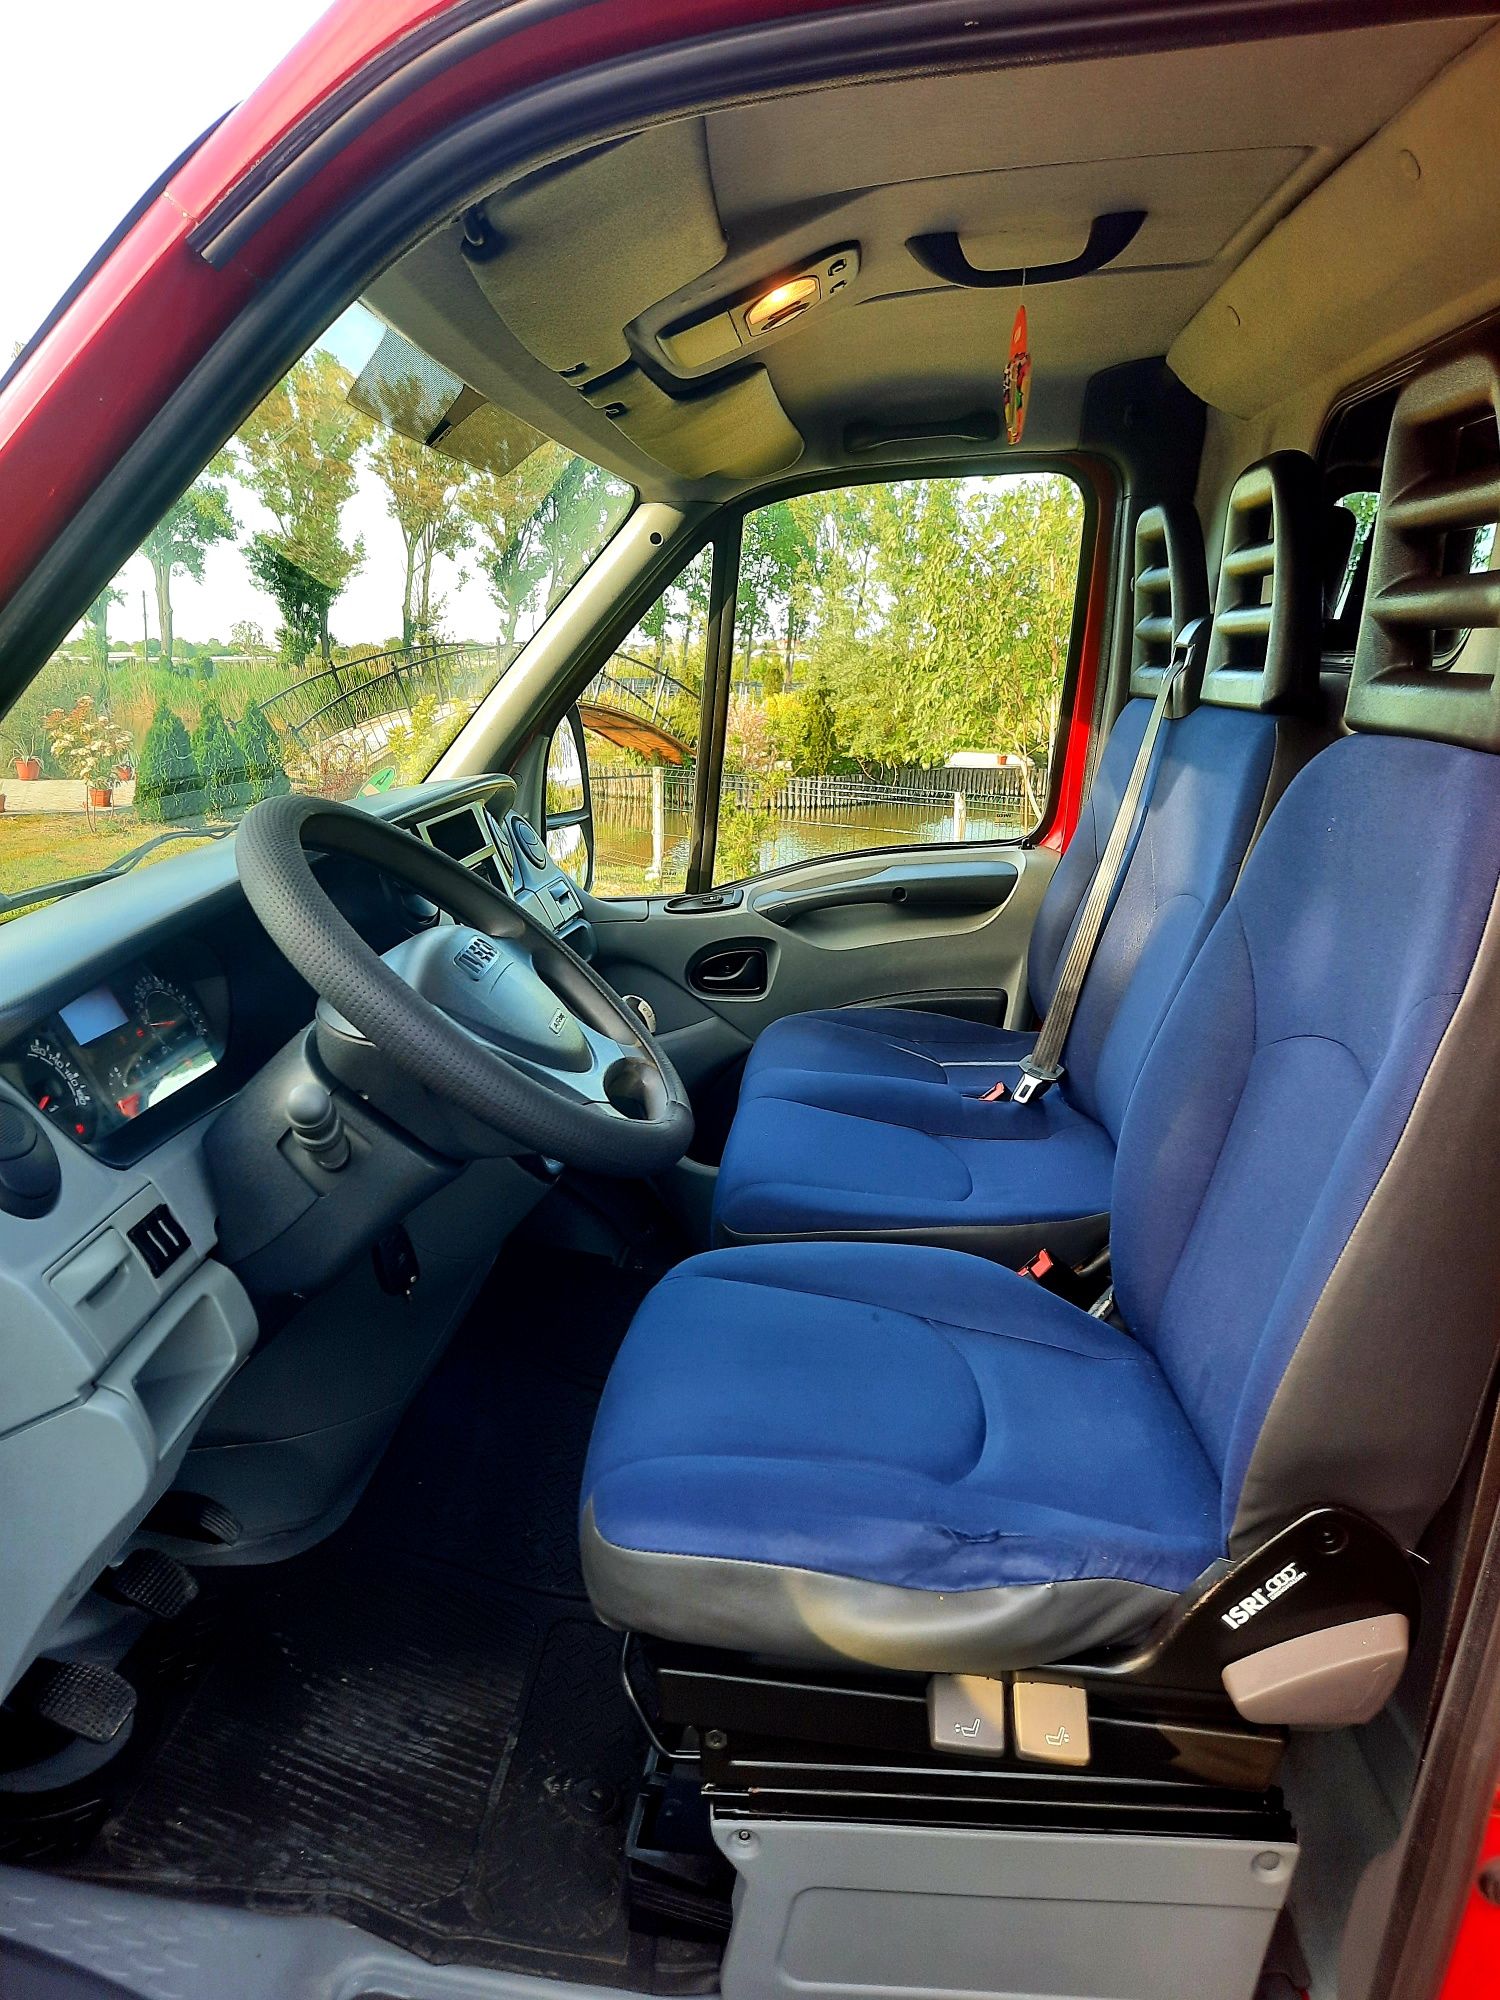 Iveco daily 35c18 208000km ! Impecabil!